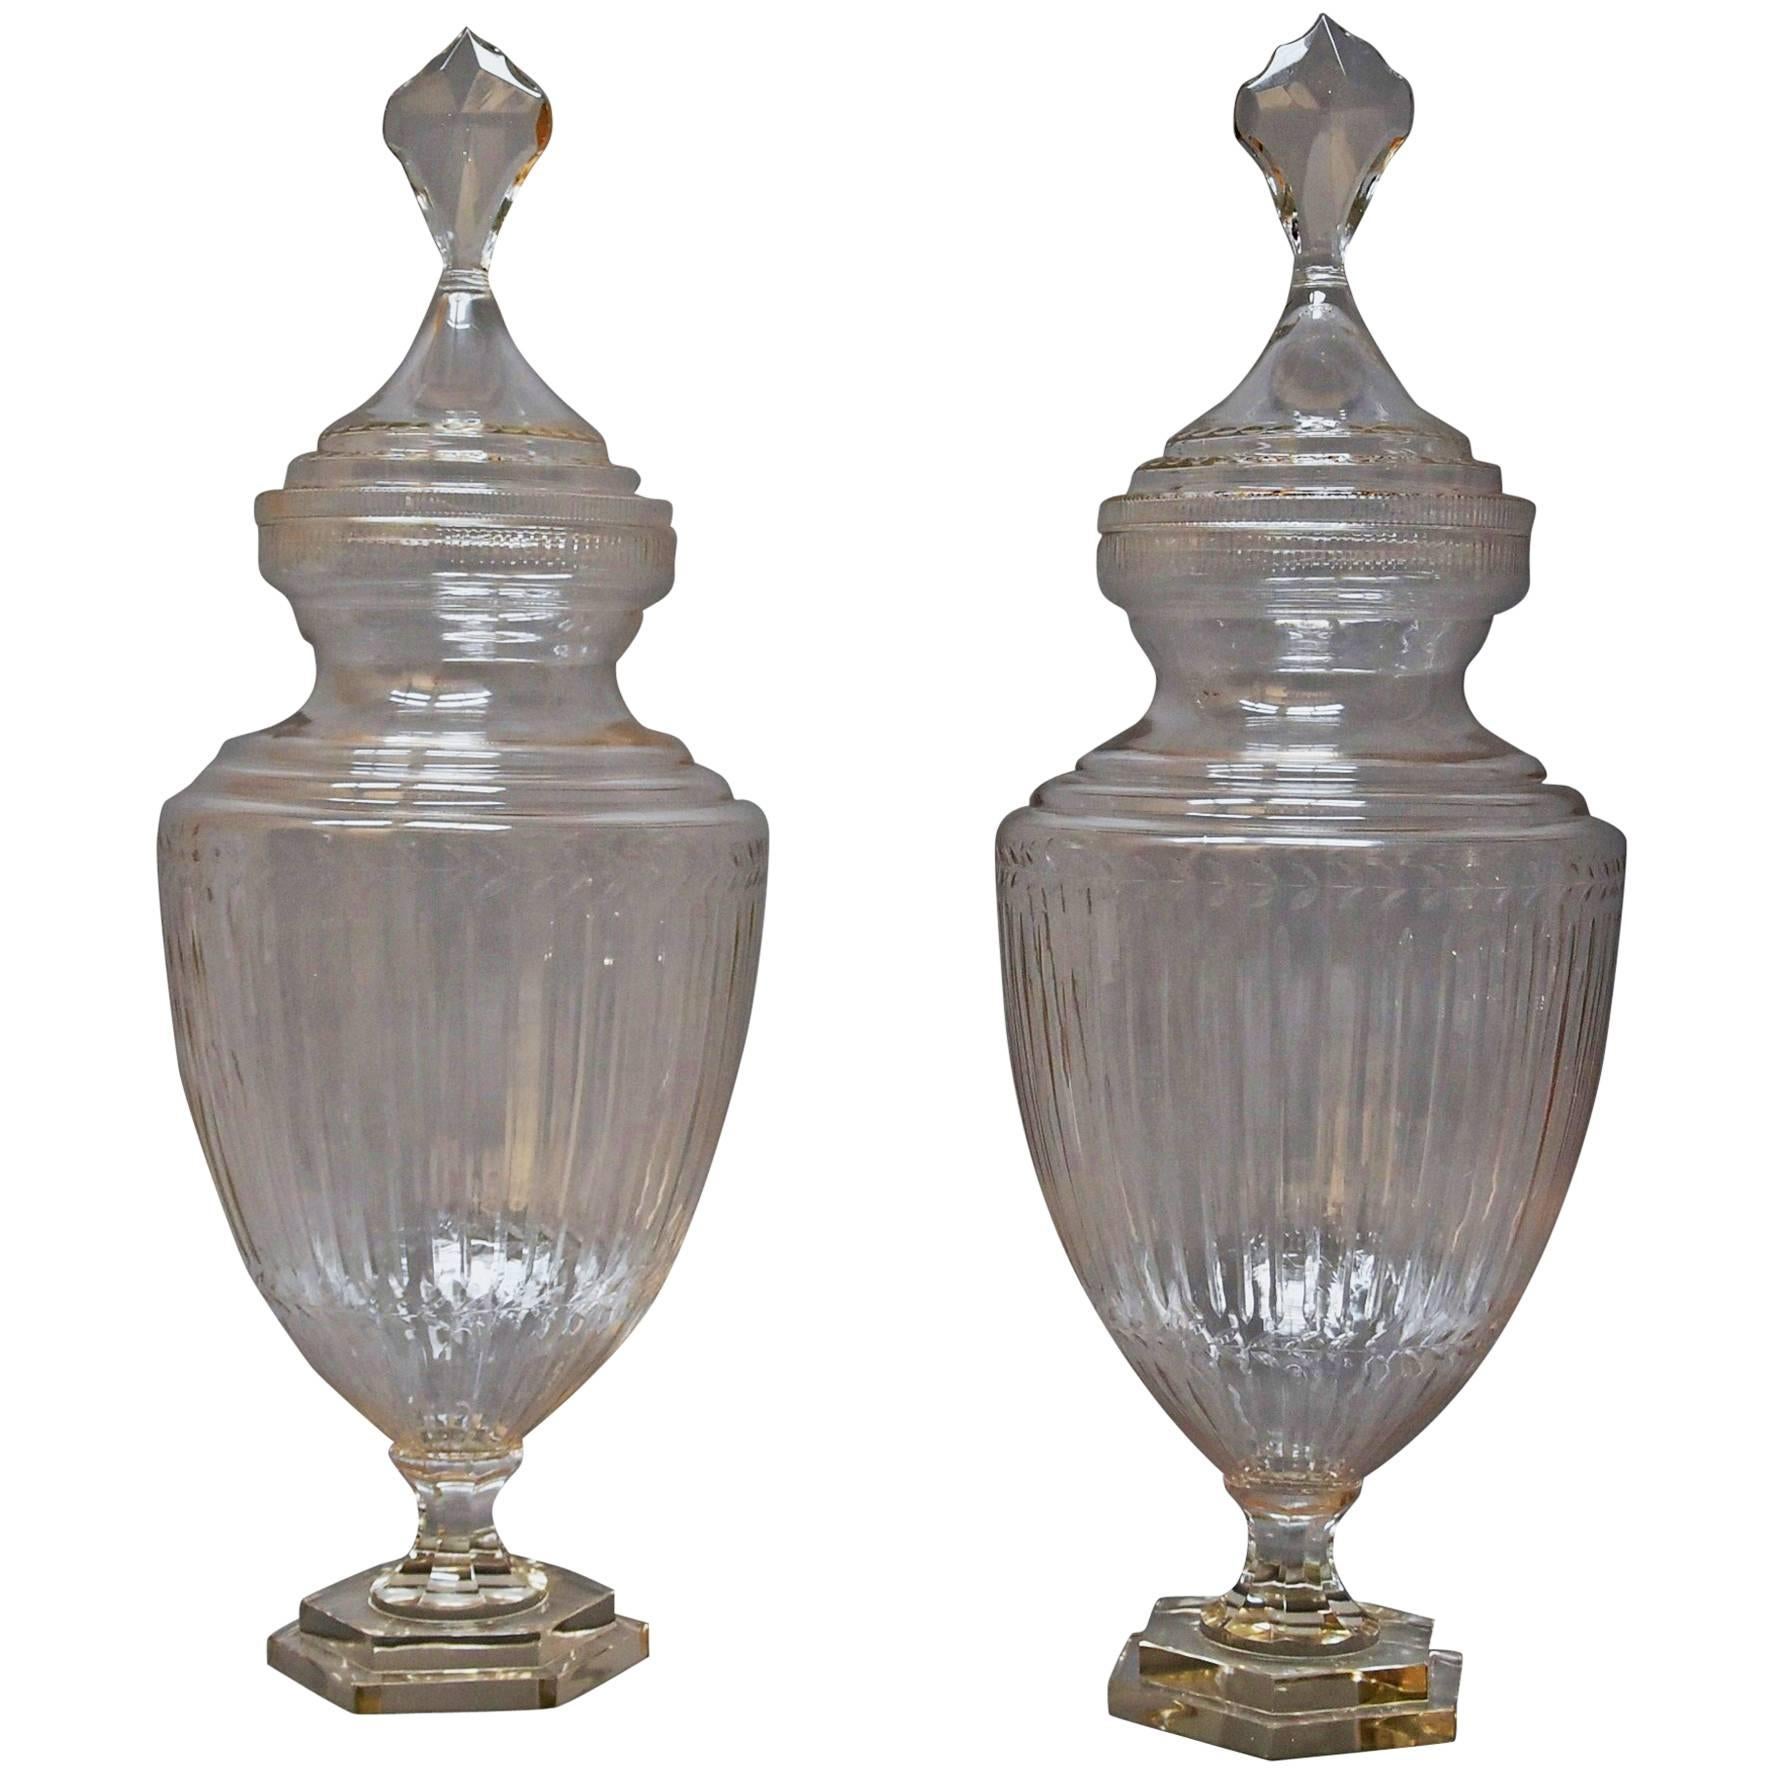 Large Pair of Edwardian Cut-Glass Lidded Display Jars 'or Apothecary Jars'